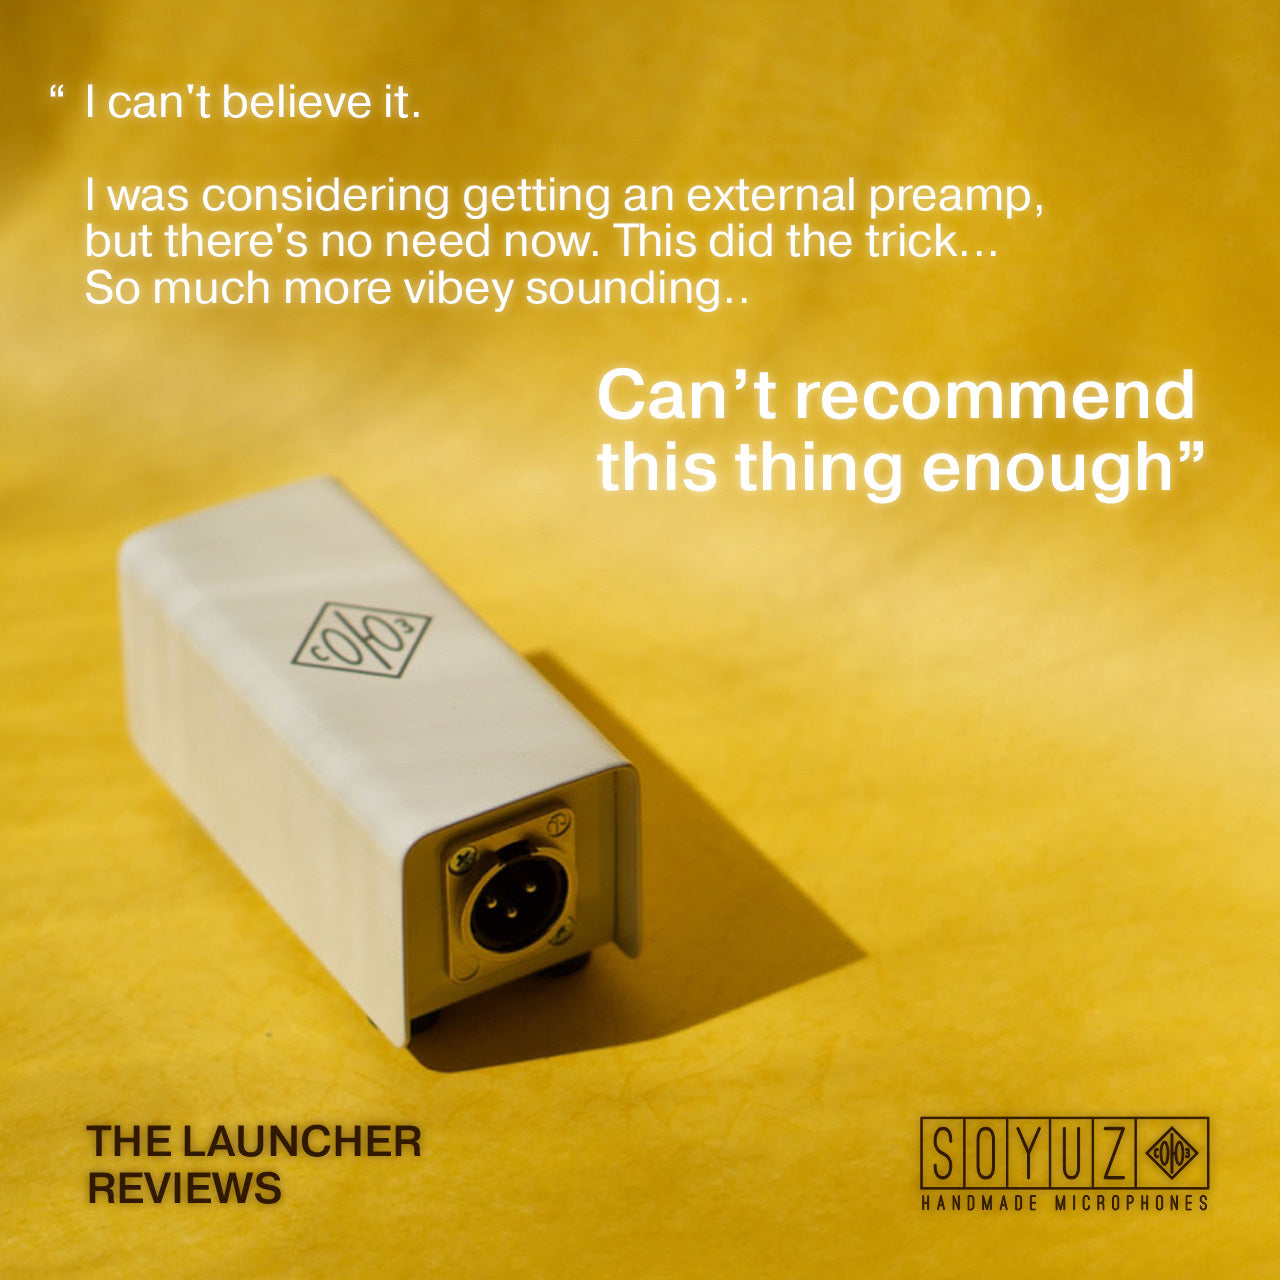 The Launcher: In-line Microphone Preamplifier